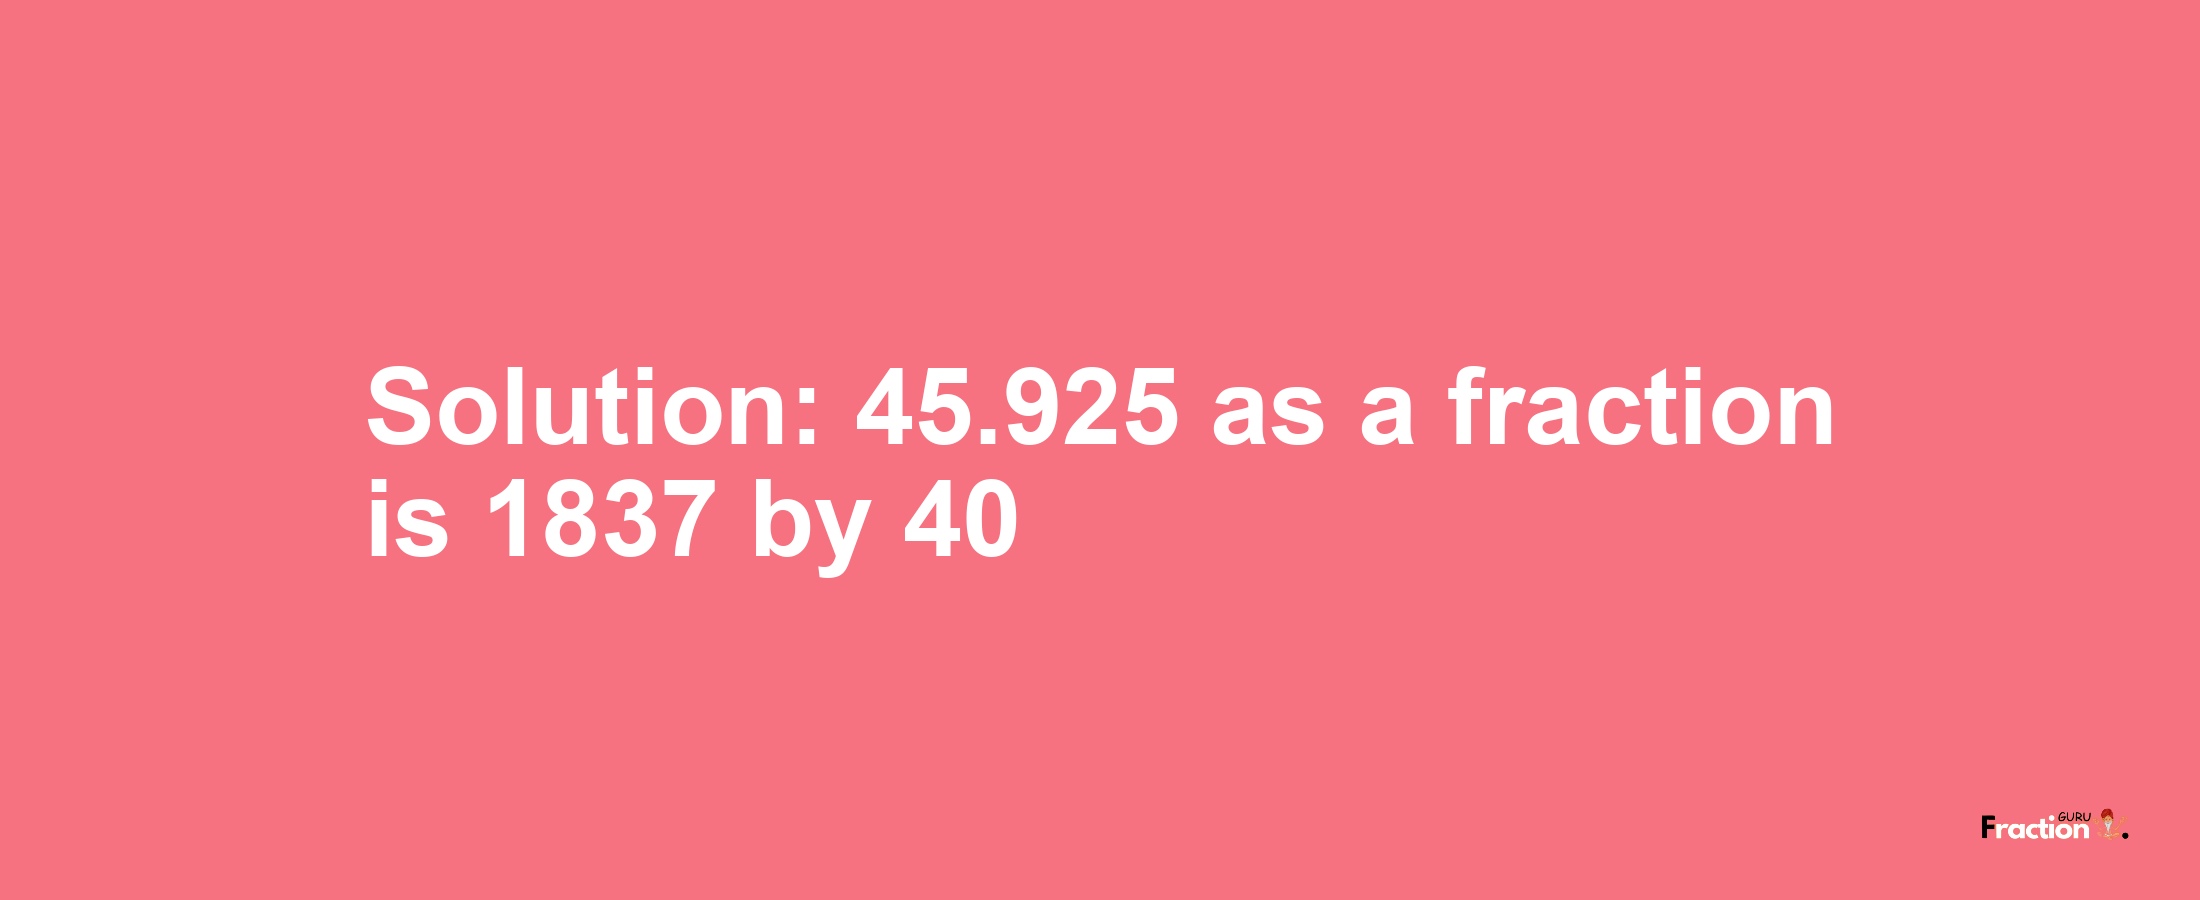 Solution:45.925 as a fraction is 1837/40